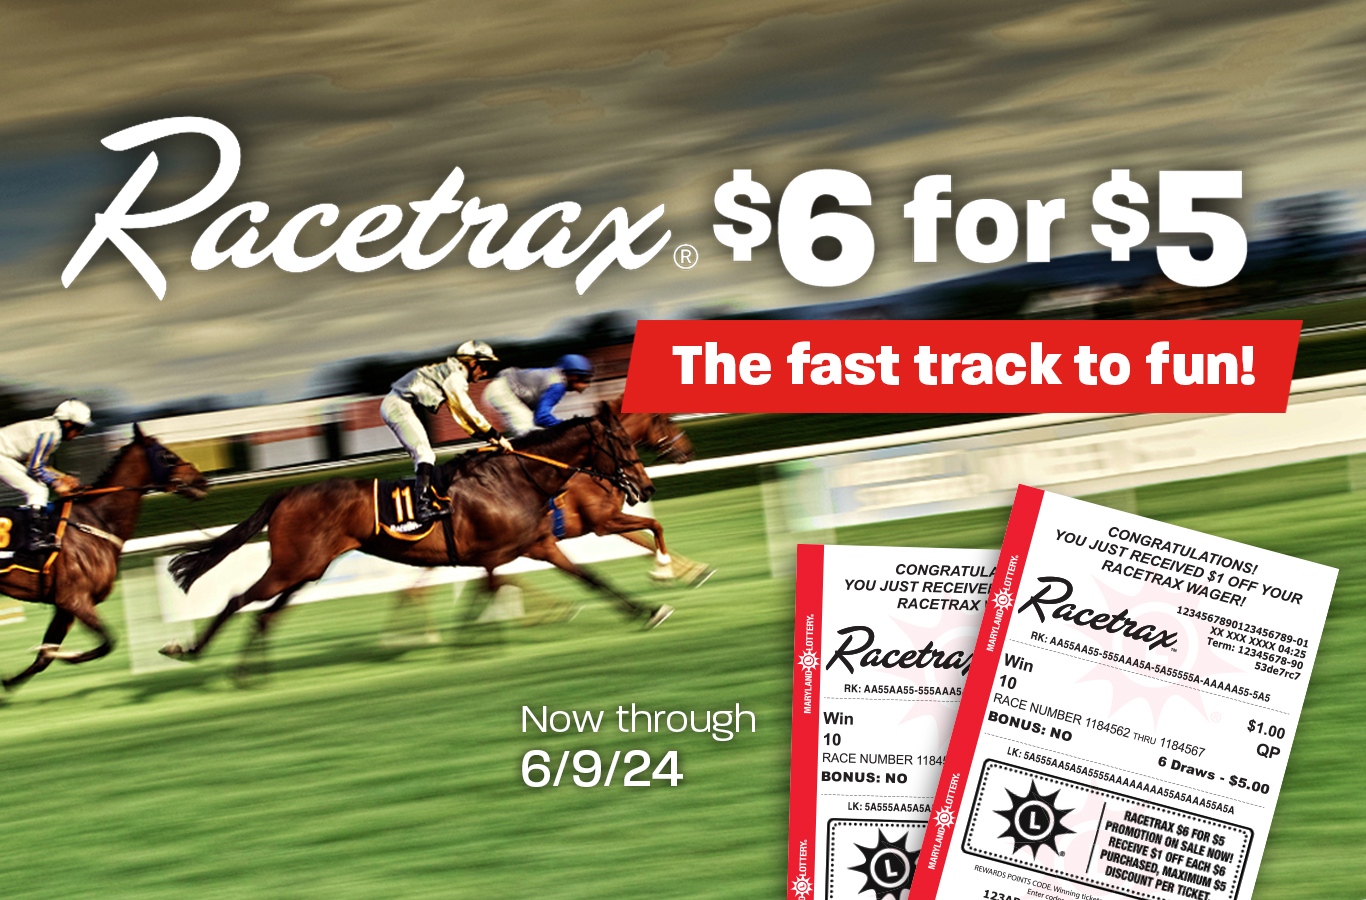 Now through June 9th, ANY $6 Racetrax® purchase will receive a $1 discount, with a maximum discount of $5 on any ticket valued at $30 or more.